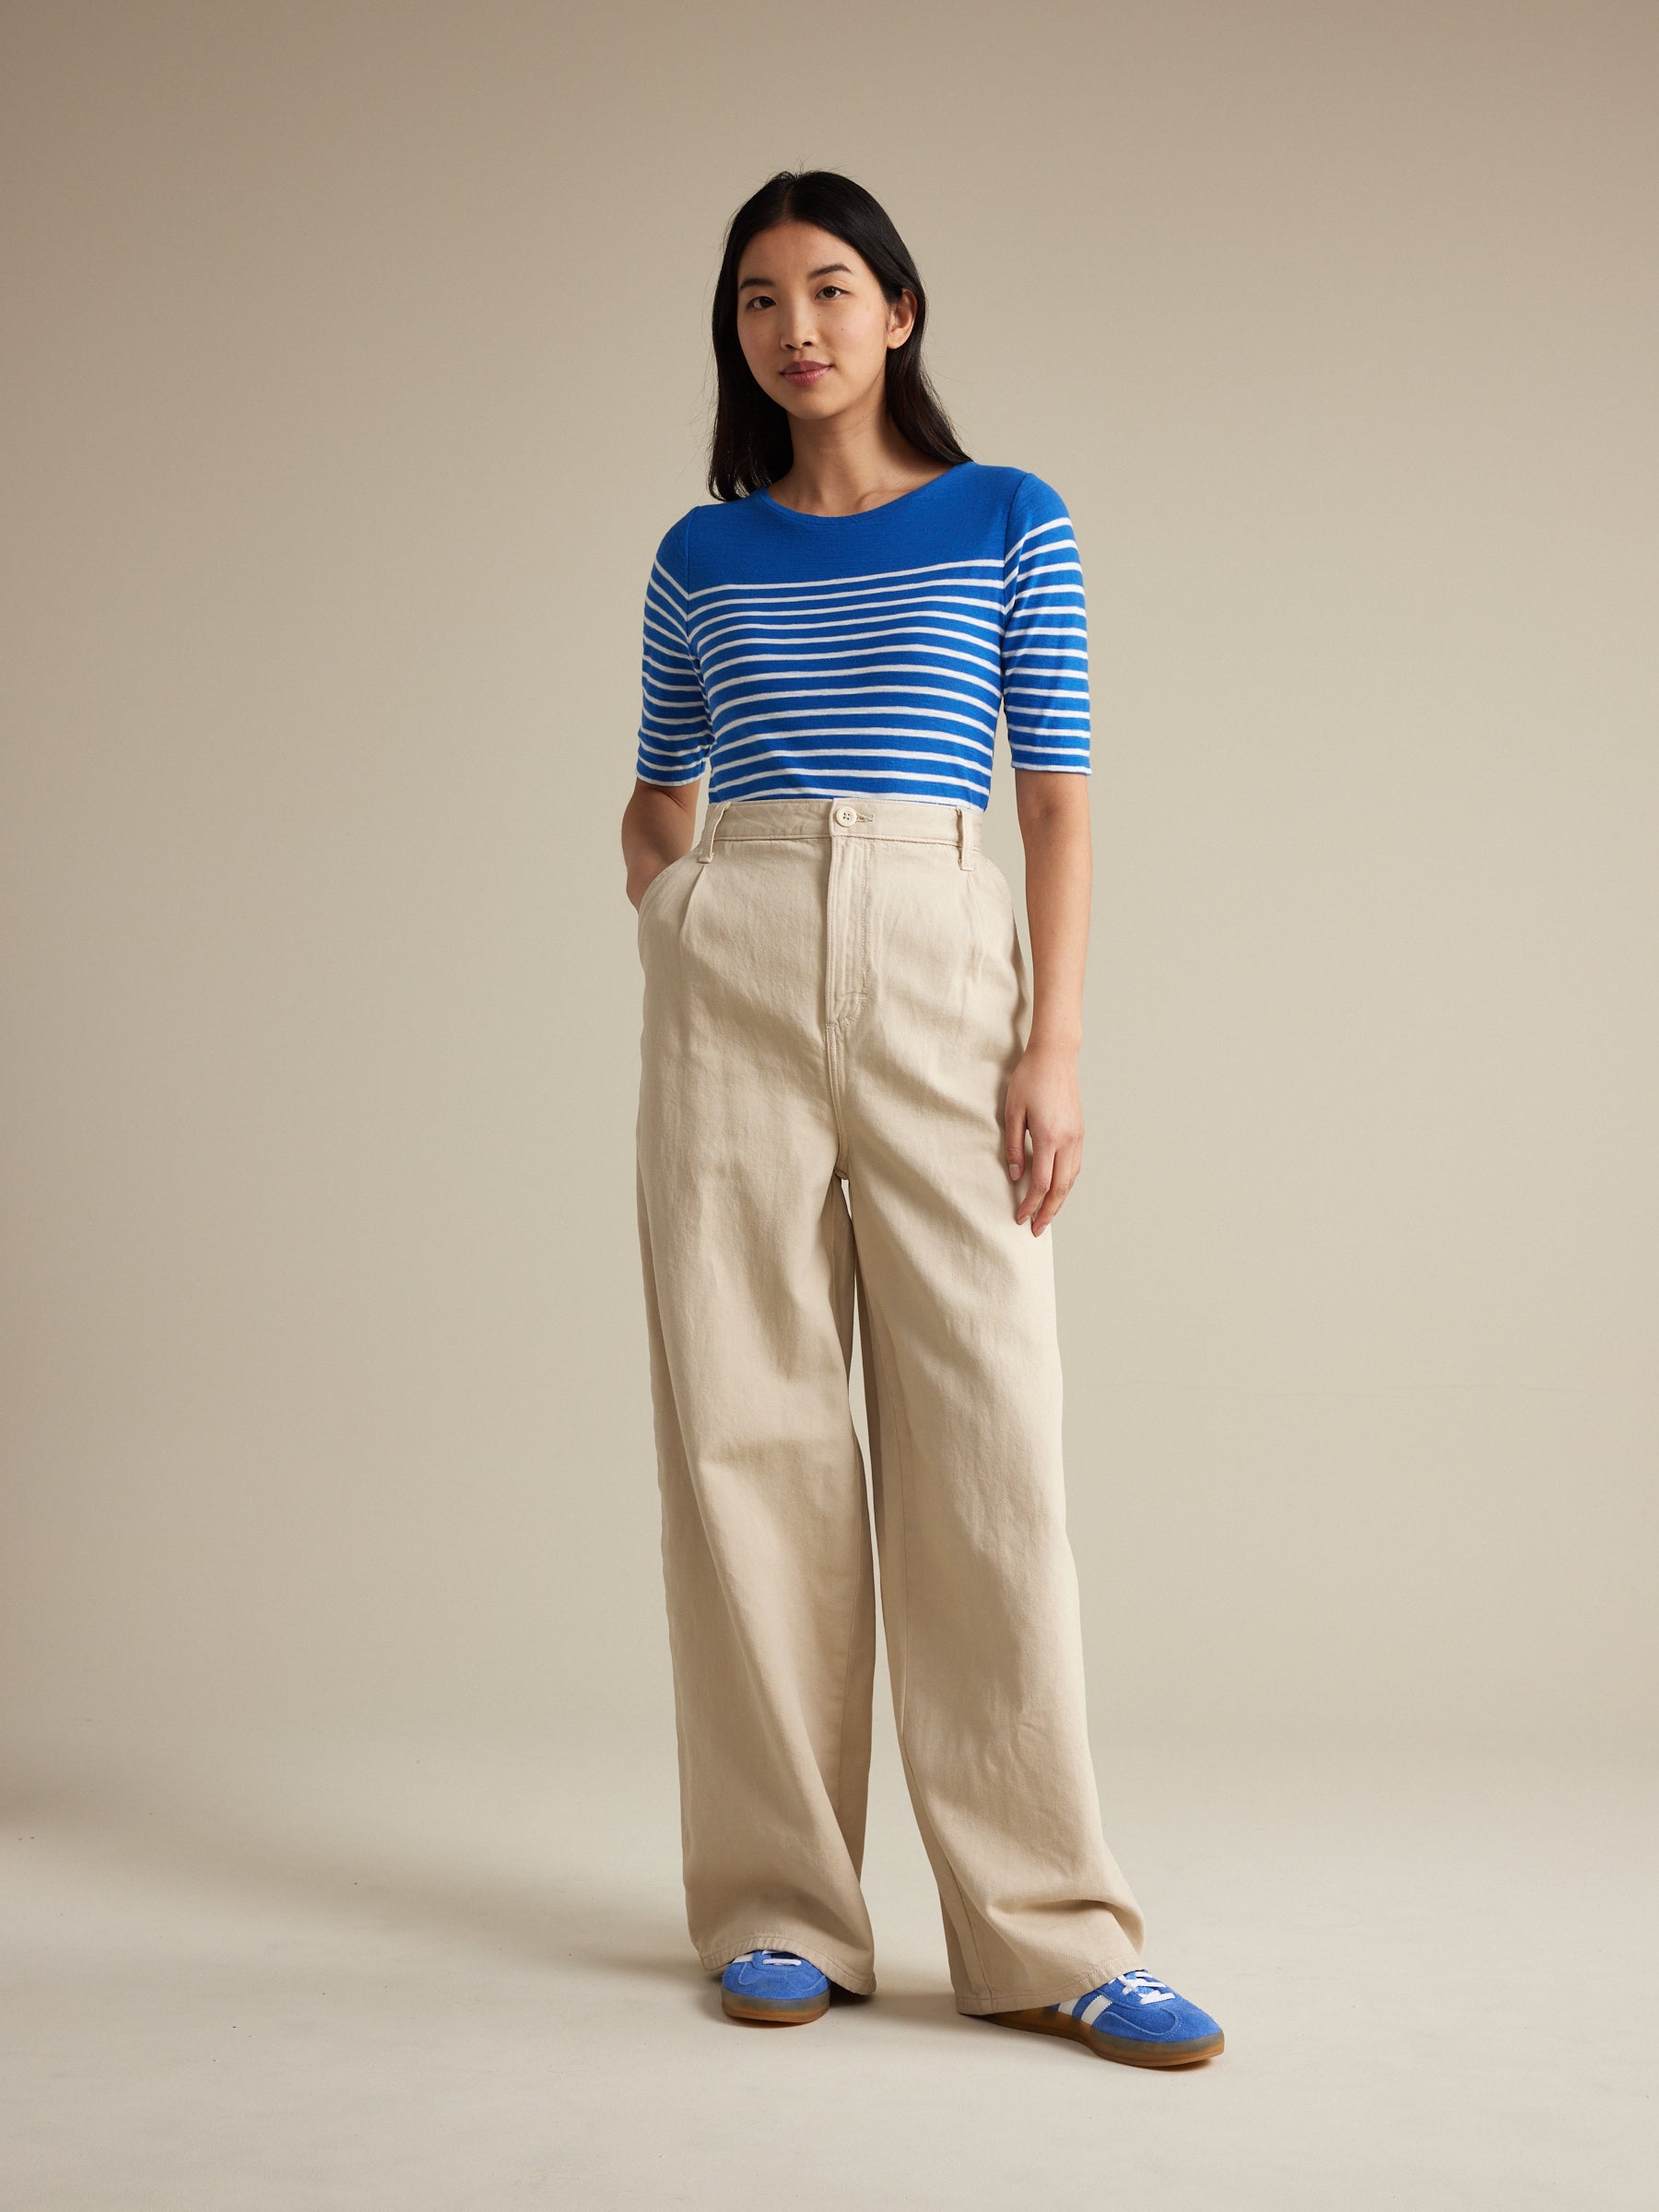 LEE | RELAXED CHINO PANTS – Bellerose